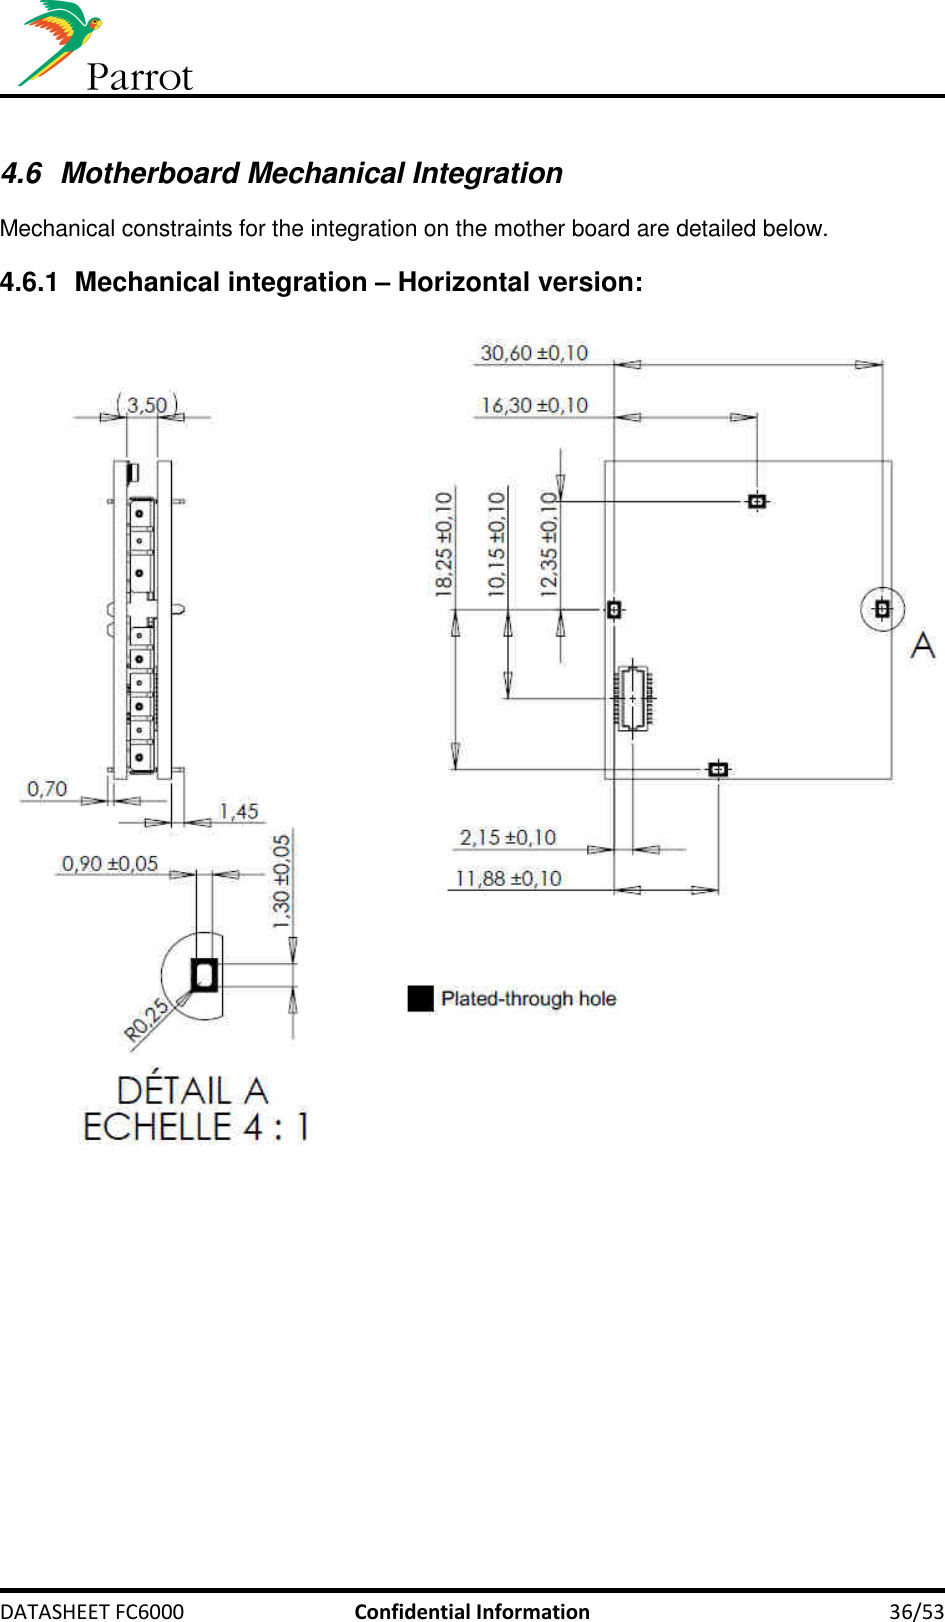     DATASHEET FC6000  Confidential Information  36/53  4.6  Motherboard Mechanical Integration Mechanical constraints for the integration on the mother board are detailed below.  4.6.1  Mechanical integration – Horizontal version:      